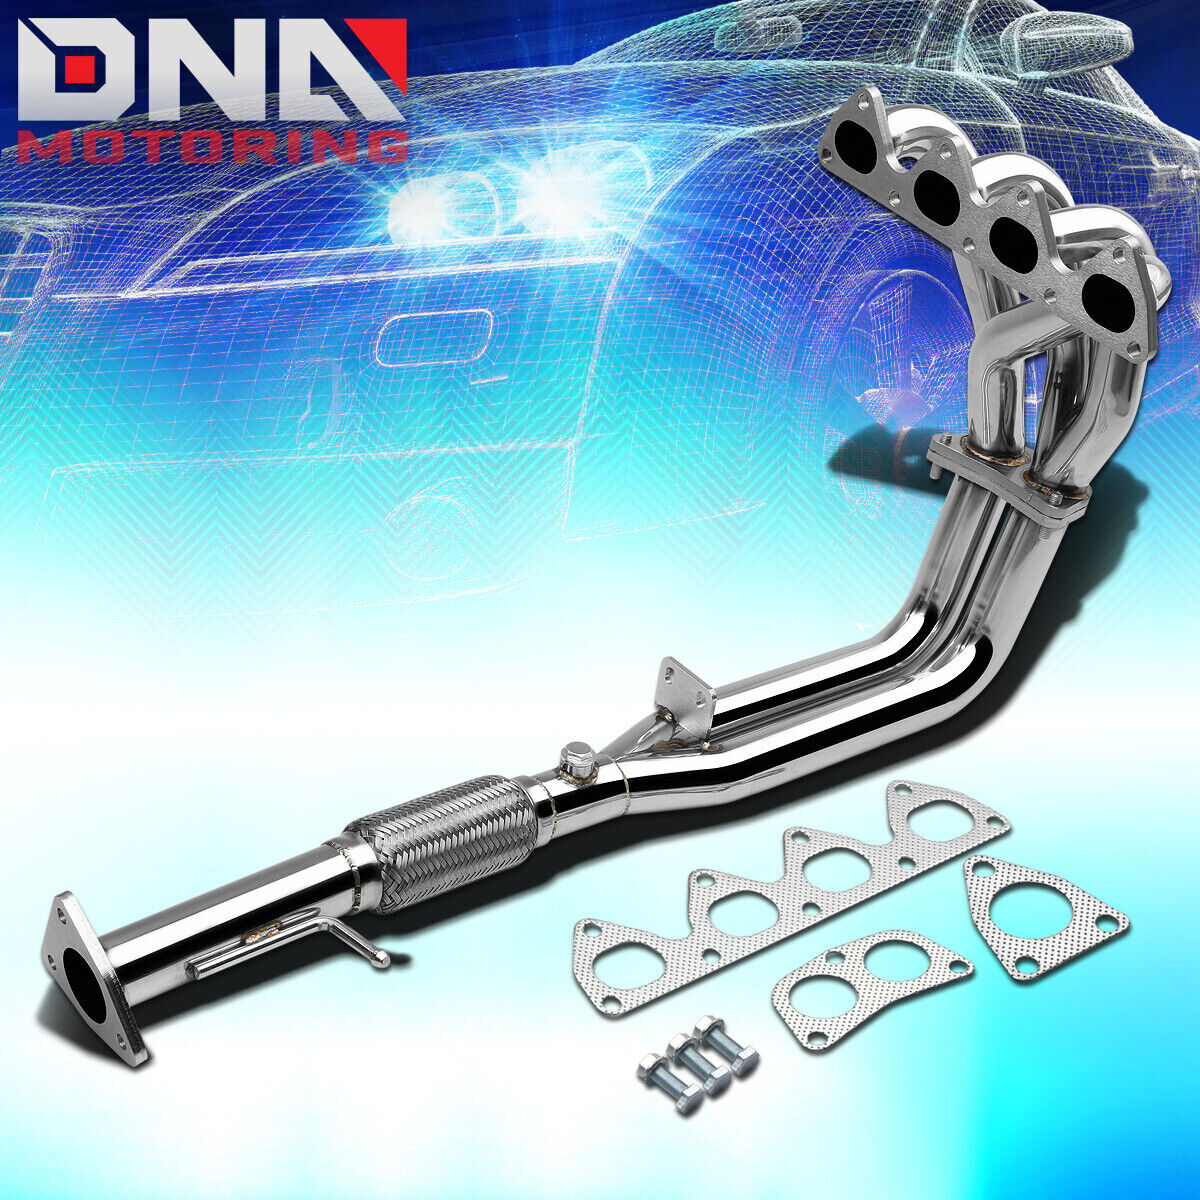 STAINLESS STEEL 4-2-1 HEADER FOR 93-96 PRELUDE VTEC H22 2.2 BB1 EXHAUST/MANIFOLD